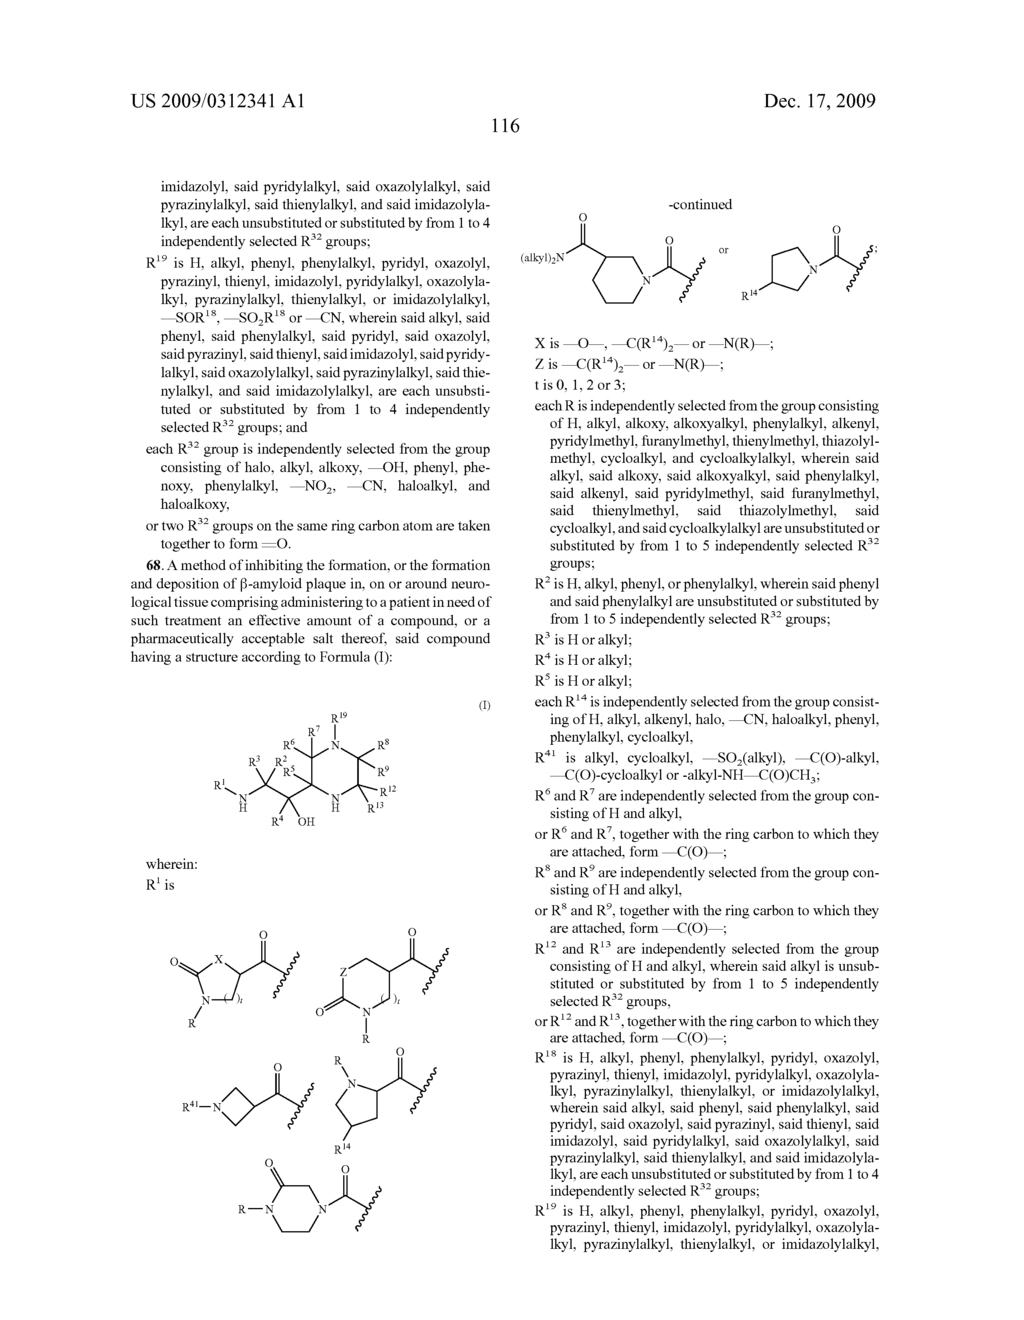 CYCLIC AMINE BACE-1 INHIBITORS HAVING A HETEROCYCLIC SUBSTITUENT - diagram, schematic, and image 117